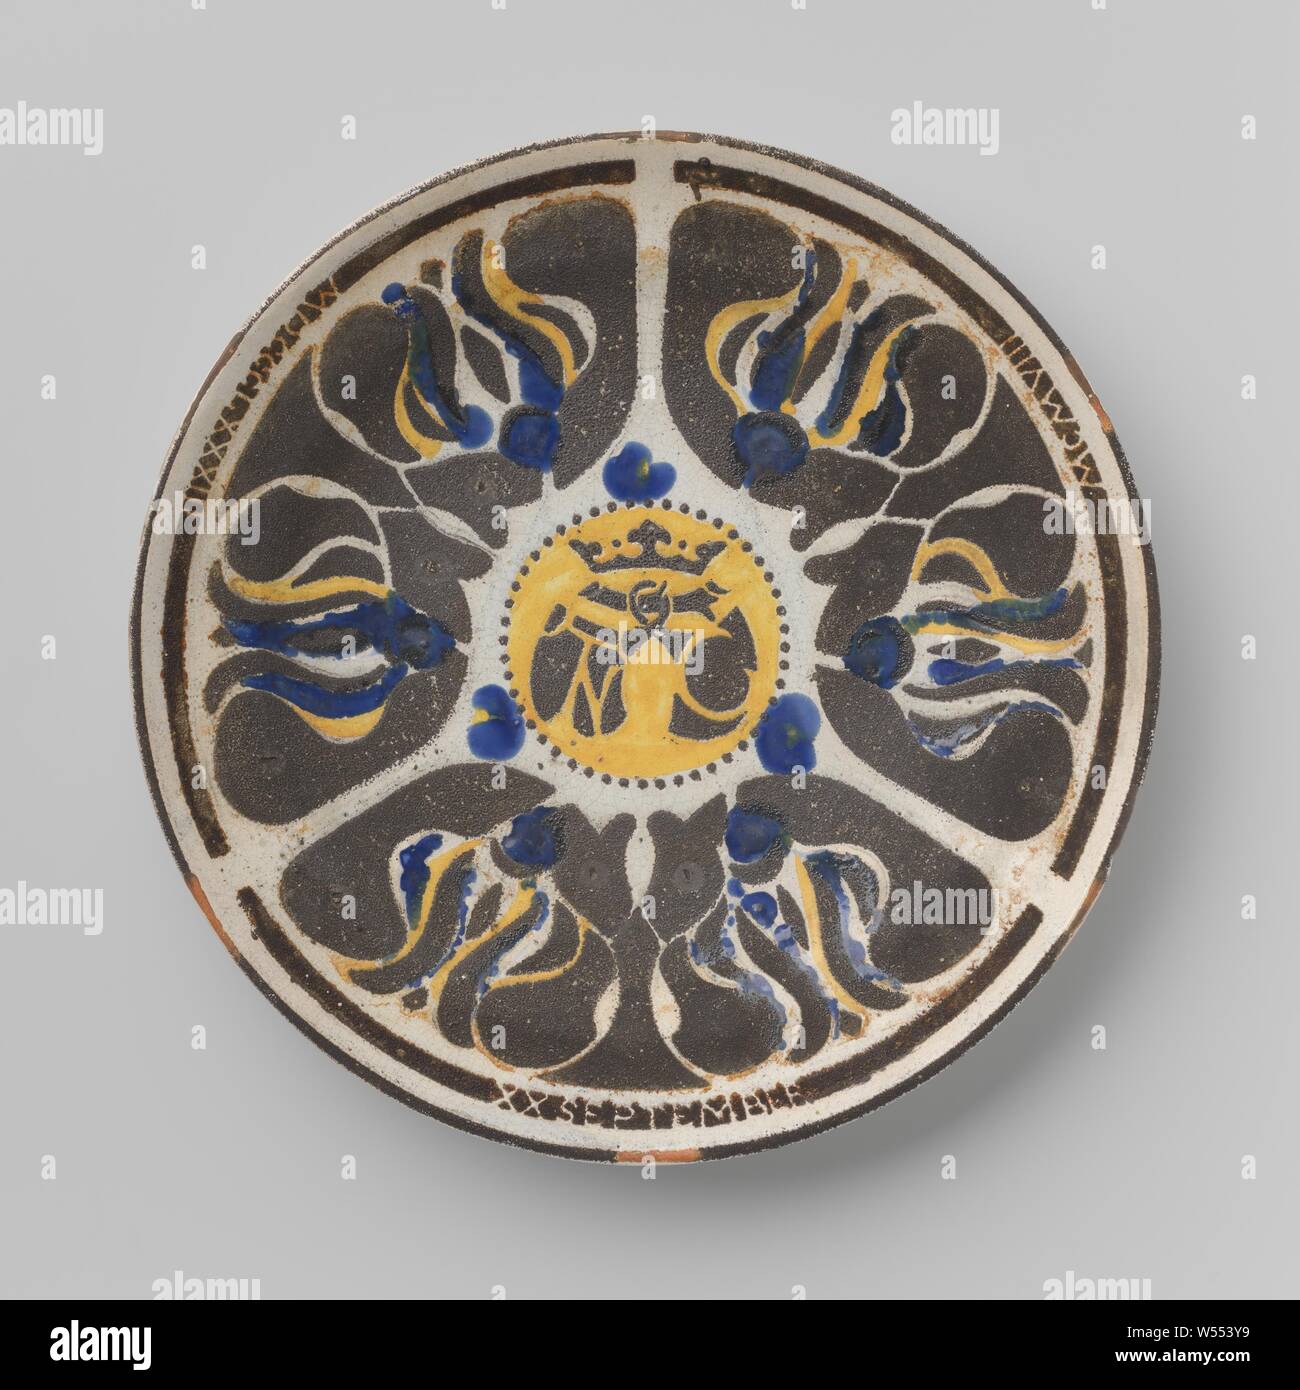 Wall plate for the 25-year wedding of J.R. Tutein Nolthenius and M.A. Cordes, Pottery plate, serving the 25-year wedding of J.R. Tutein Nolthenius and M.A. Cordes. The abstracted flower (?) Decor is executed in brown (saved in the white glaze) and in yellow and blue on the glaze, in the middle a round yellow field with a double shield under a crown, again in brown and saved in the white glaze, with the letters N and C in yellow. On the border in white on brown: MDCCCLXXXIII (left) and MCMVIII (right) and at the bottom XX September., Carel Adolph Lion Cachet, Delft, 1908, earthenware, h 3.3 cm Stock Photo